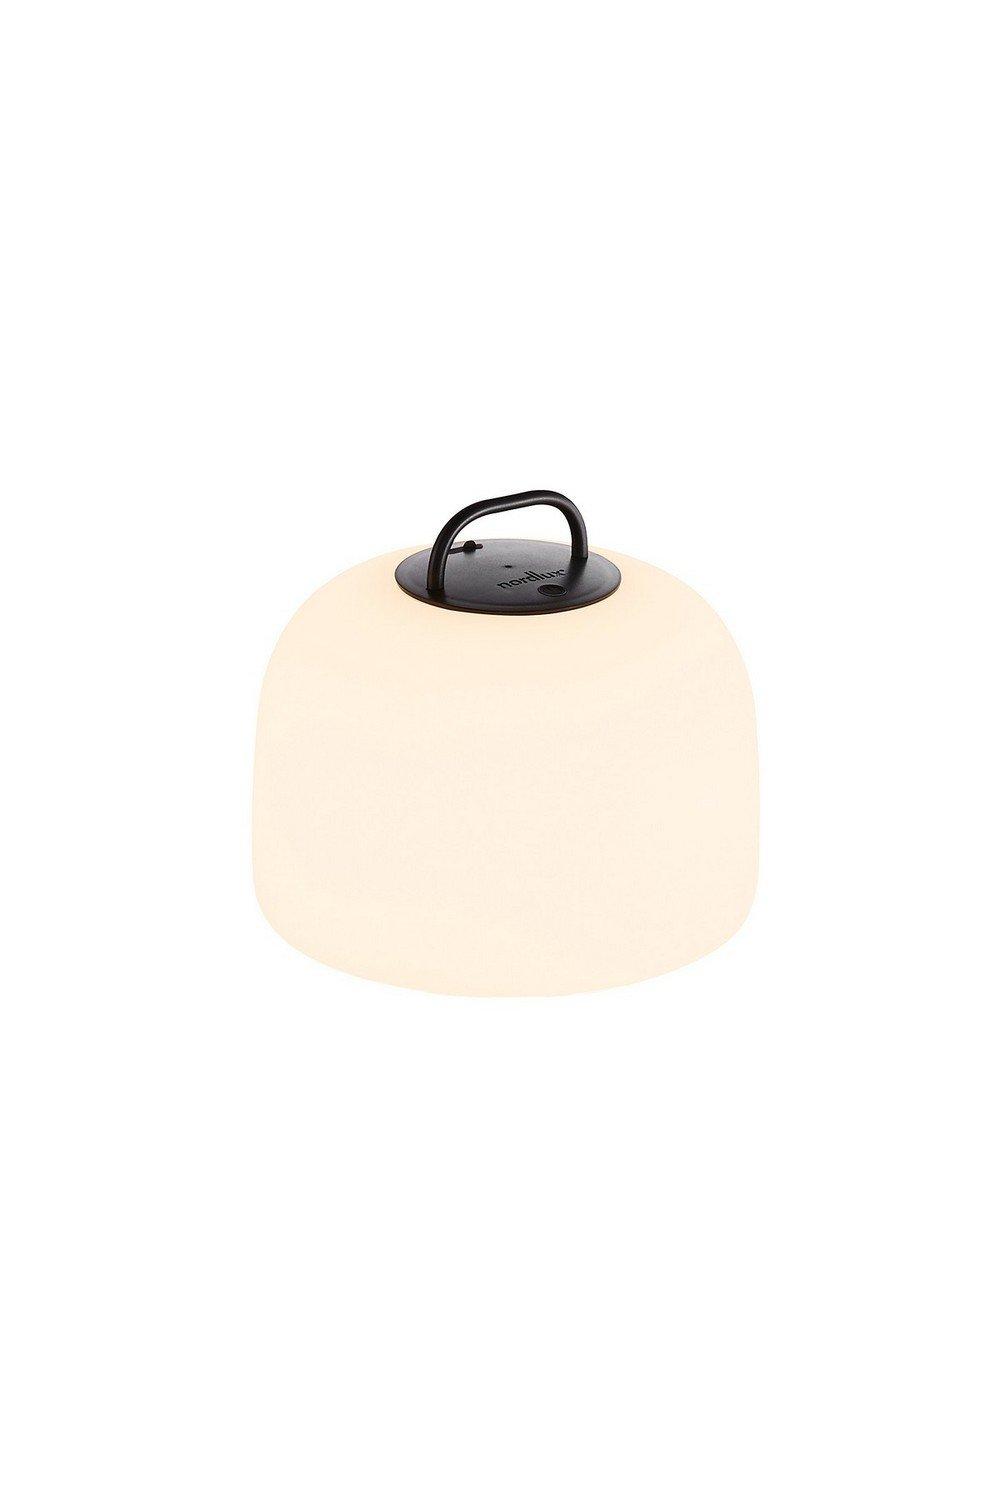 Kettle 22cm LED Dimmable Outdoor Portable Lamp White IP65 2700K